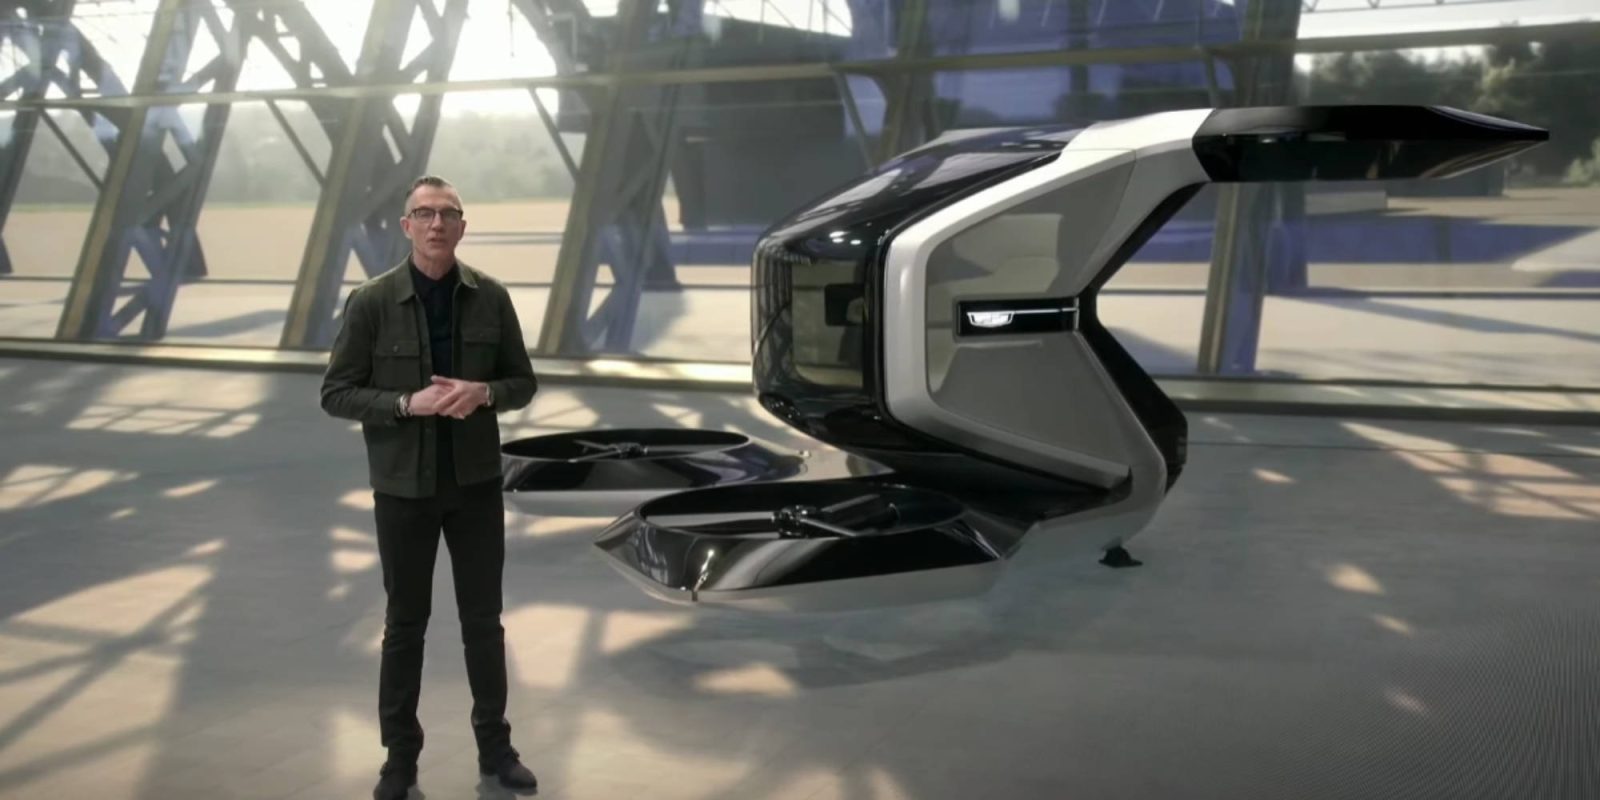 Cadillac shows off its concept VTOL passenger drone at CES - DroneDJ